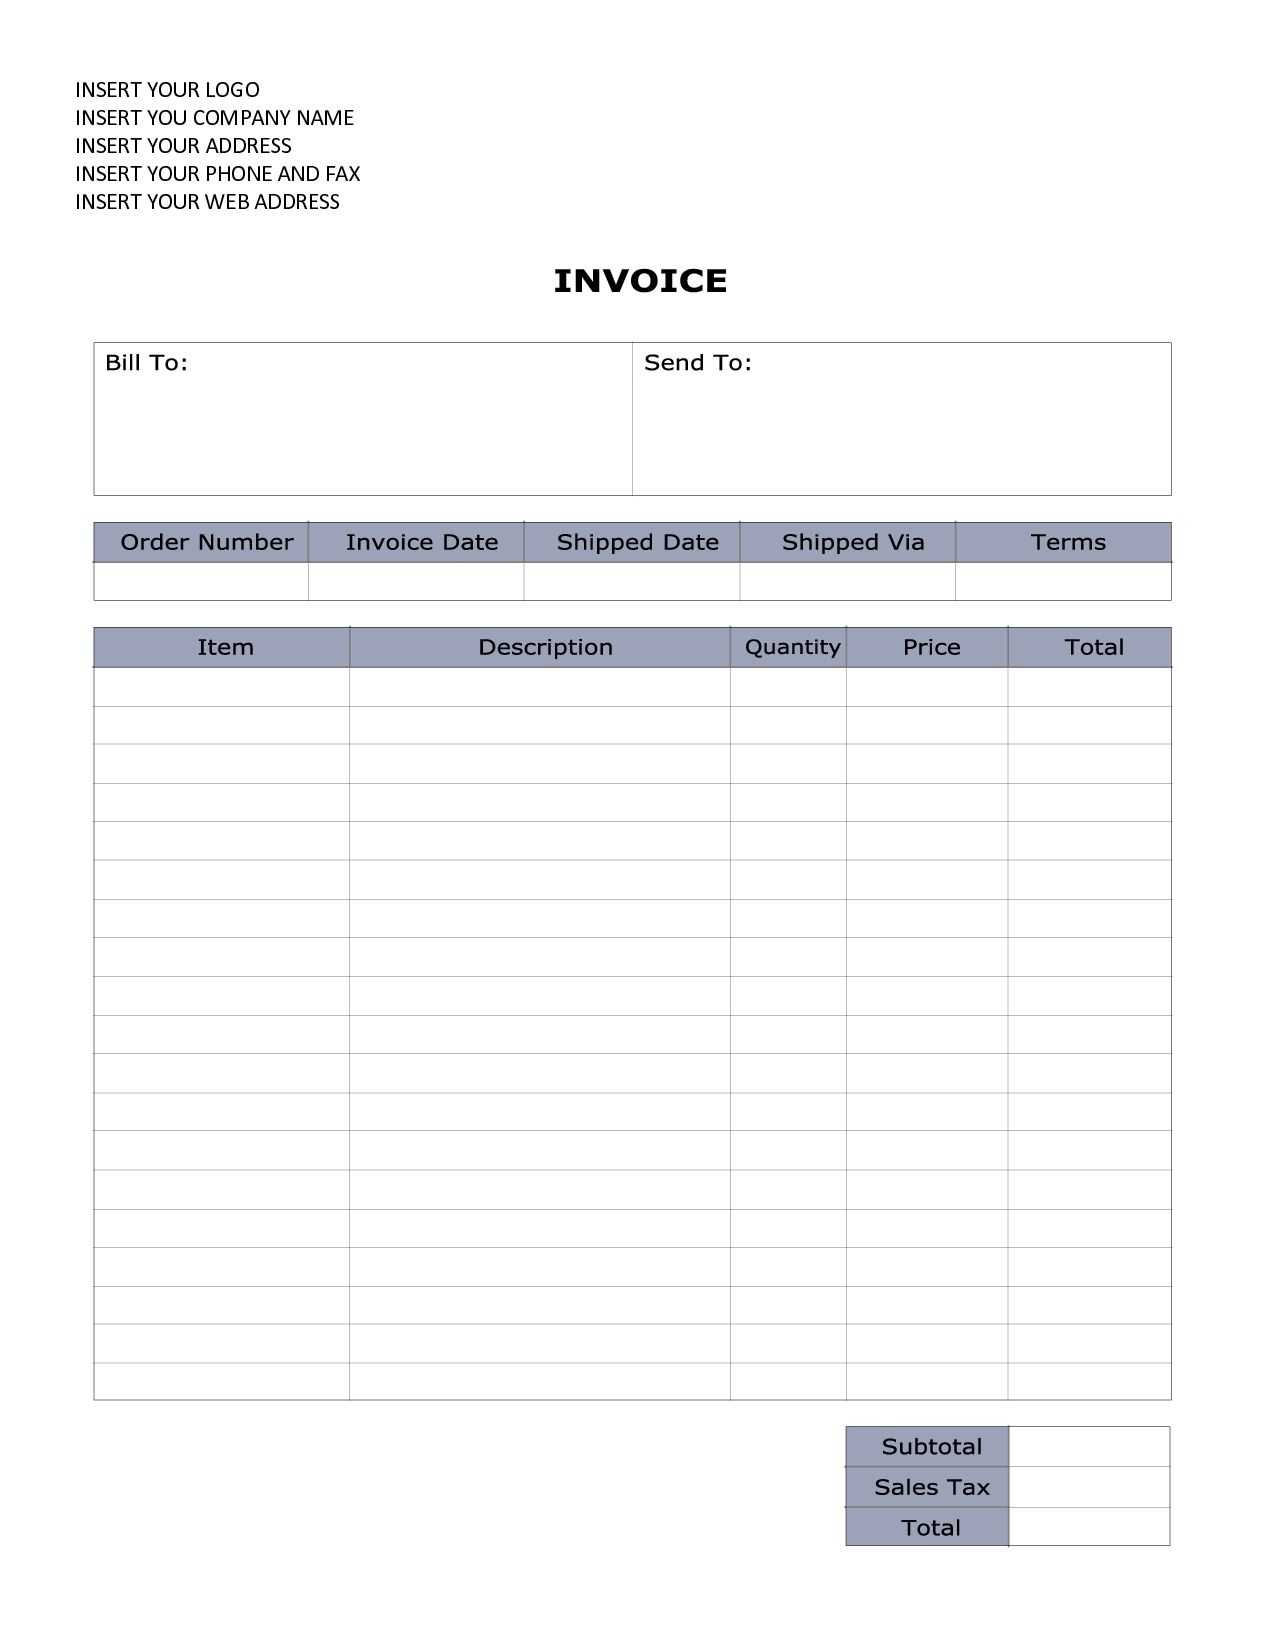 Word Document Invoice Template Sales Invoice Sample Word With Regard To Free Printable Invoice Template Microsoft Word